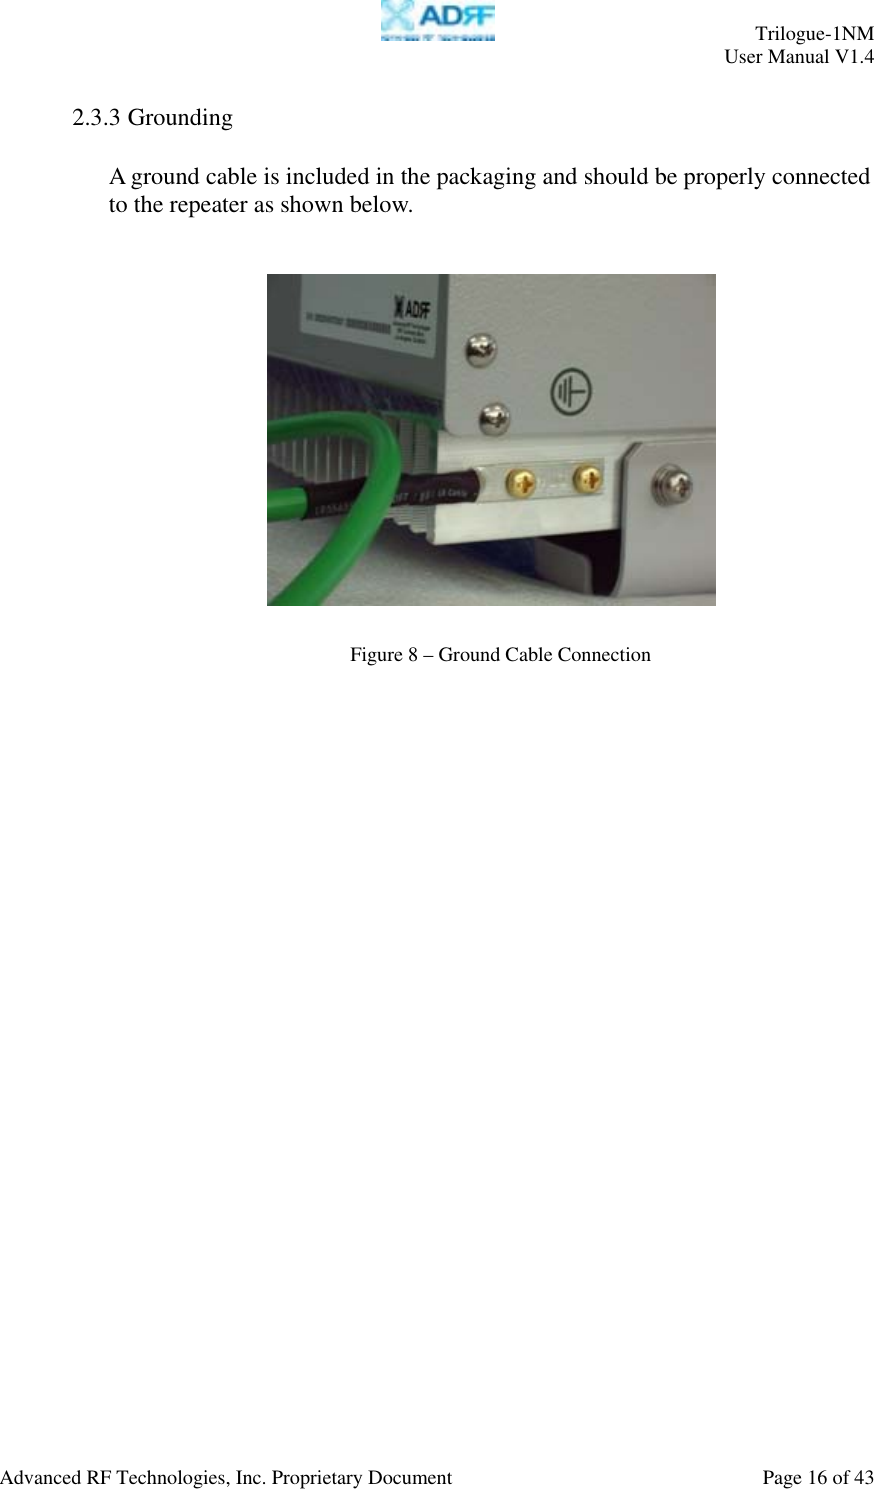     Trilogue-1NM User Manual V1.4  Advanced RF Technologies, Inc. Proprietary Document  Page 16 of 43  2.3.3 Grounding  A ground cable is included in the packaging and should be properly connected to the repeater as shown below.             Figure 8 – Ground Cable Connection 